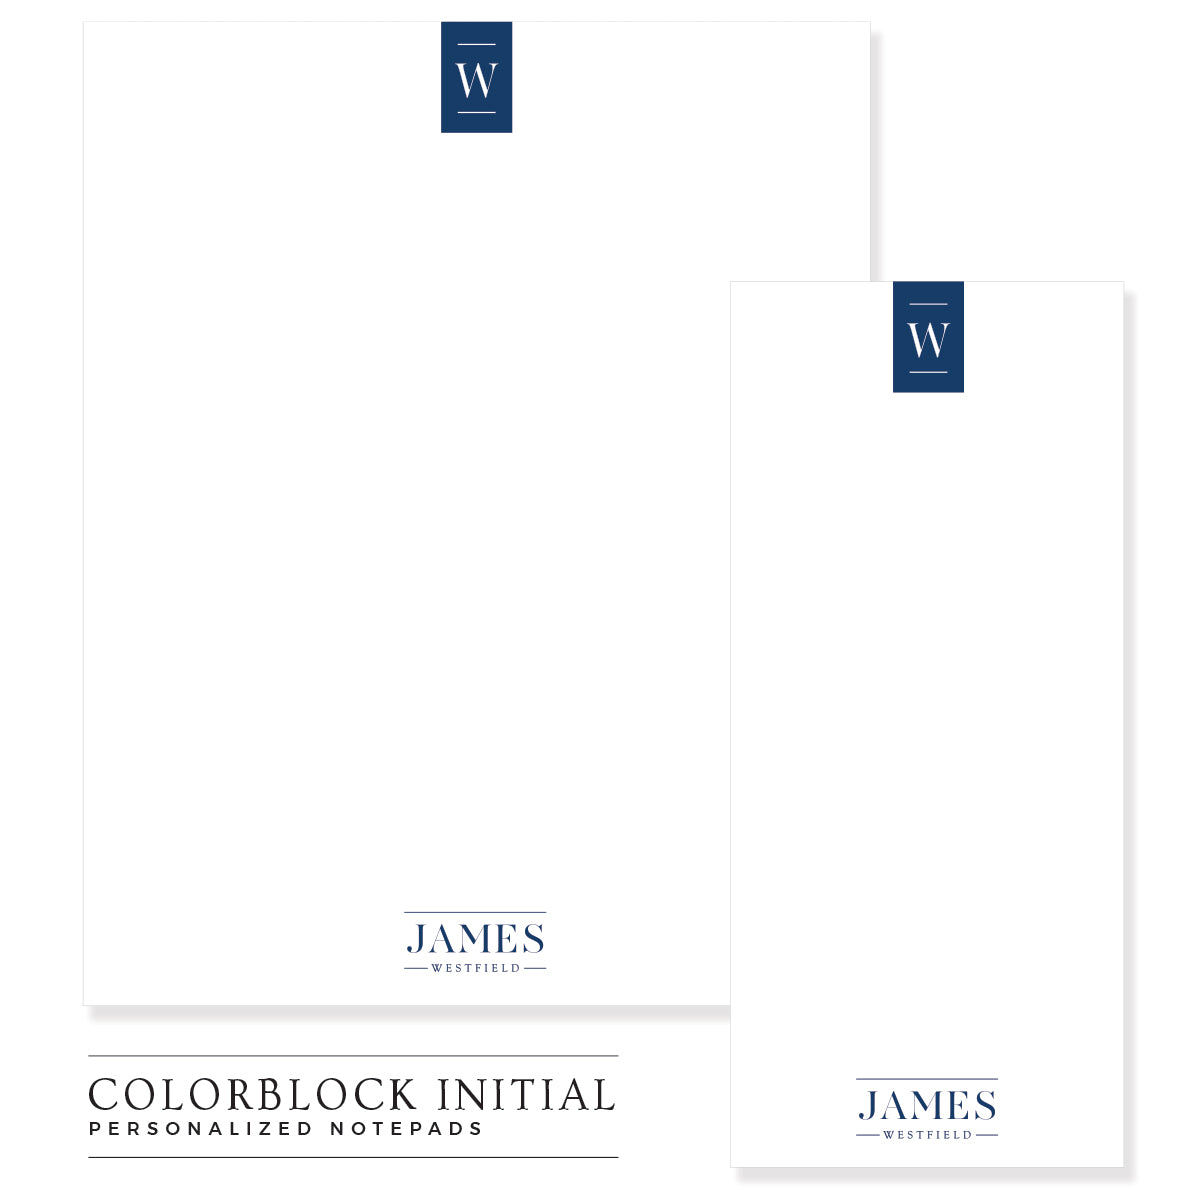 Colorblock Initial Customized Notepads, RSVP-Style - RSVP Style